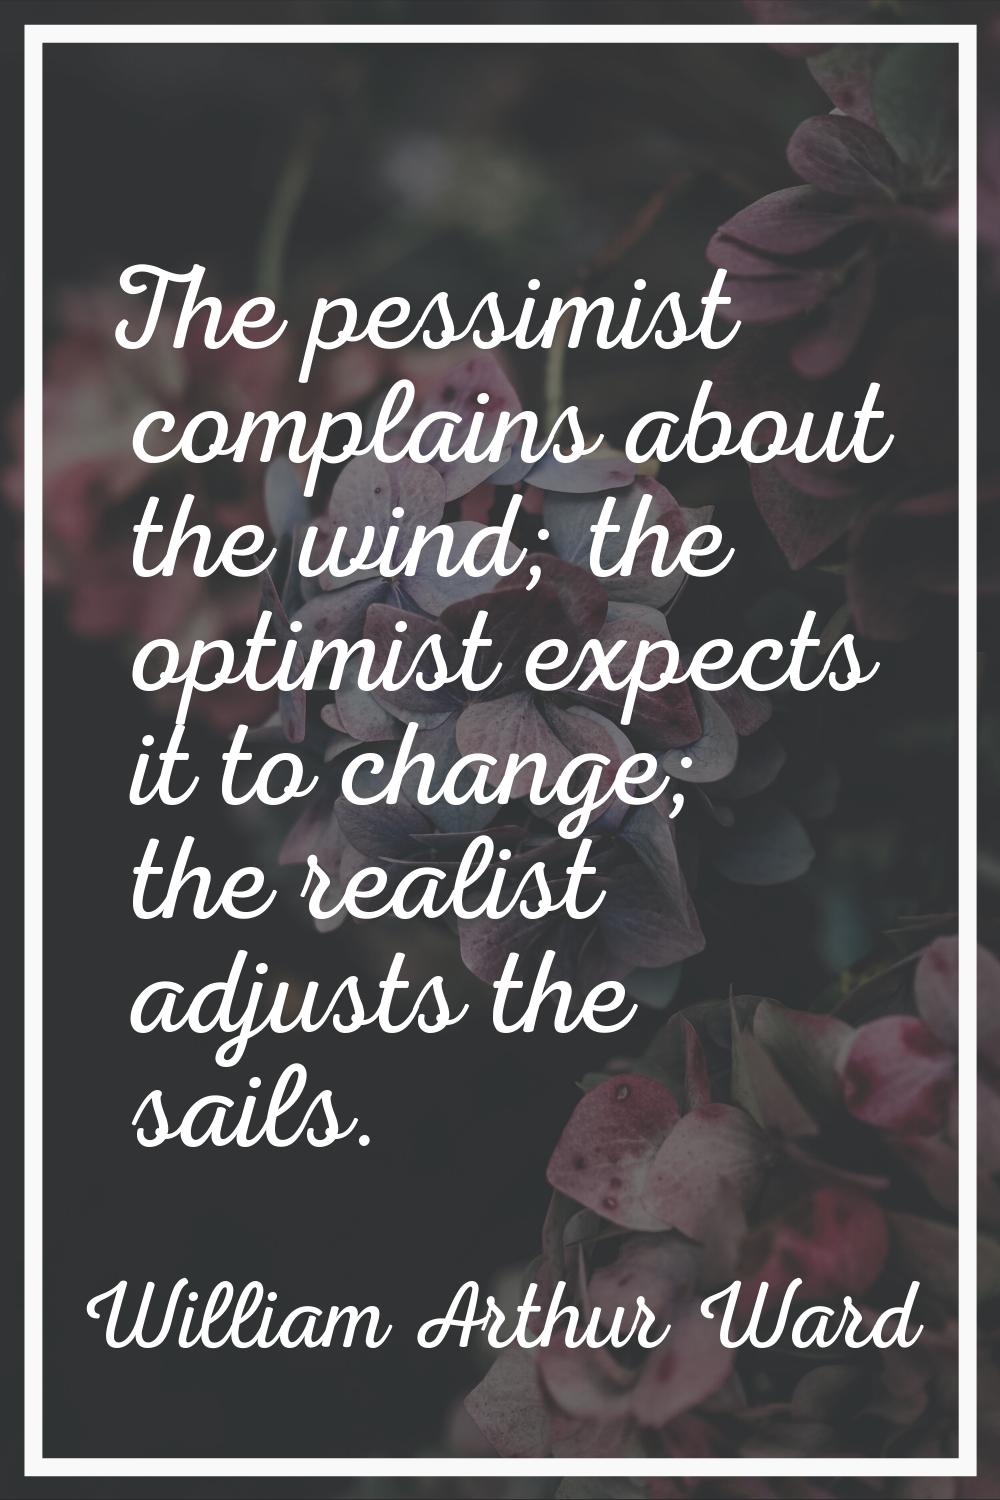 The pessimist complains about the wind; the optimist expects it to change; the realist adjusts the 